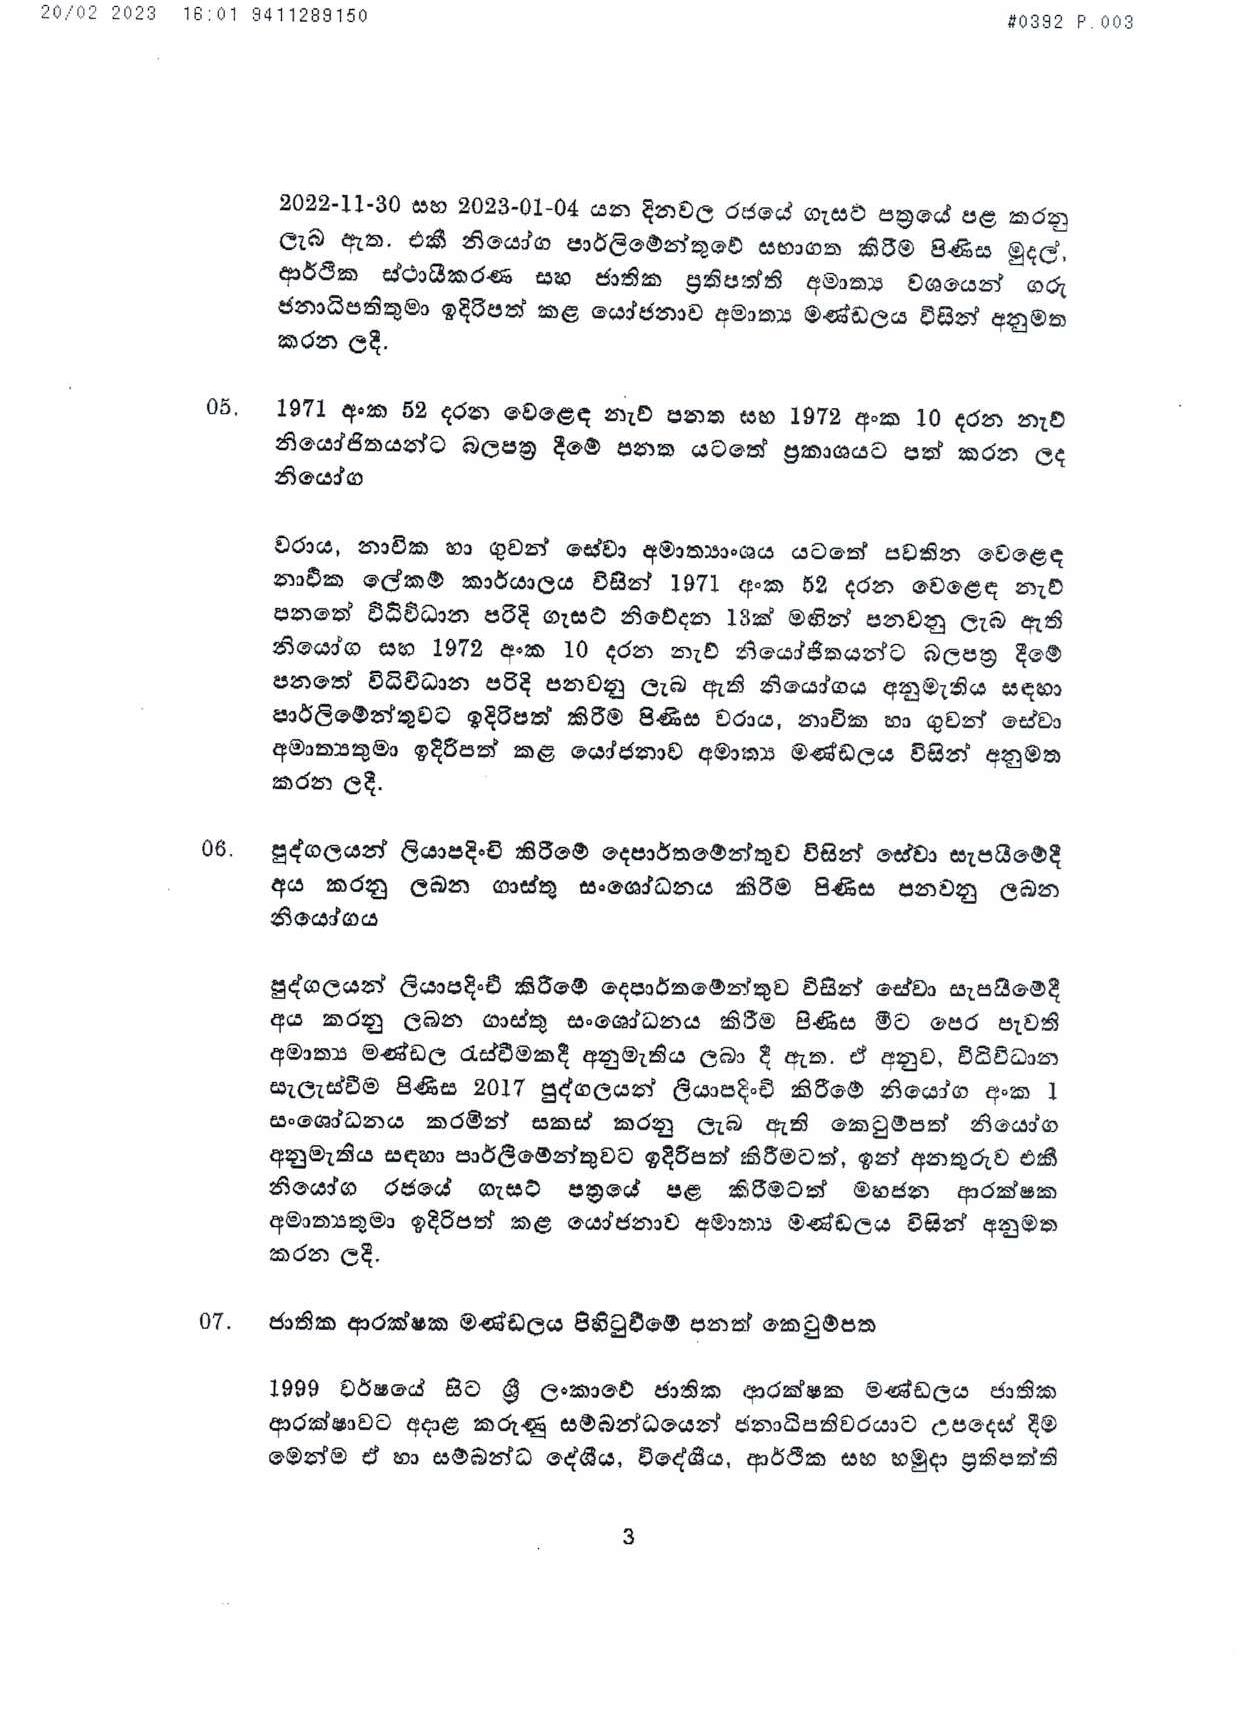 Cabinet Decisions on 20.02.2023 page 003